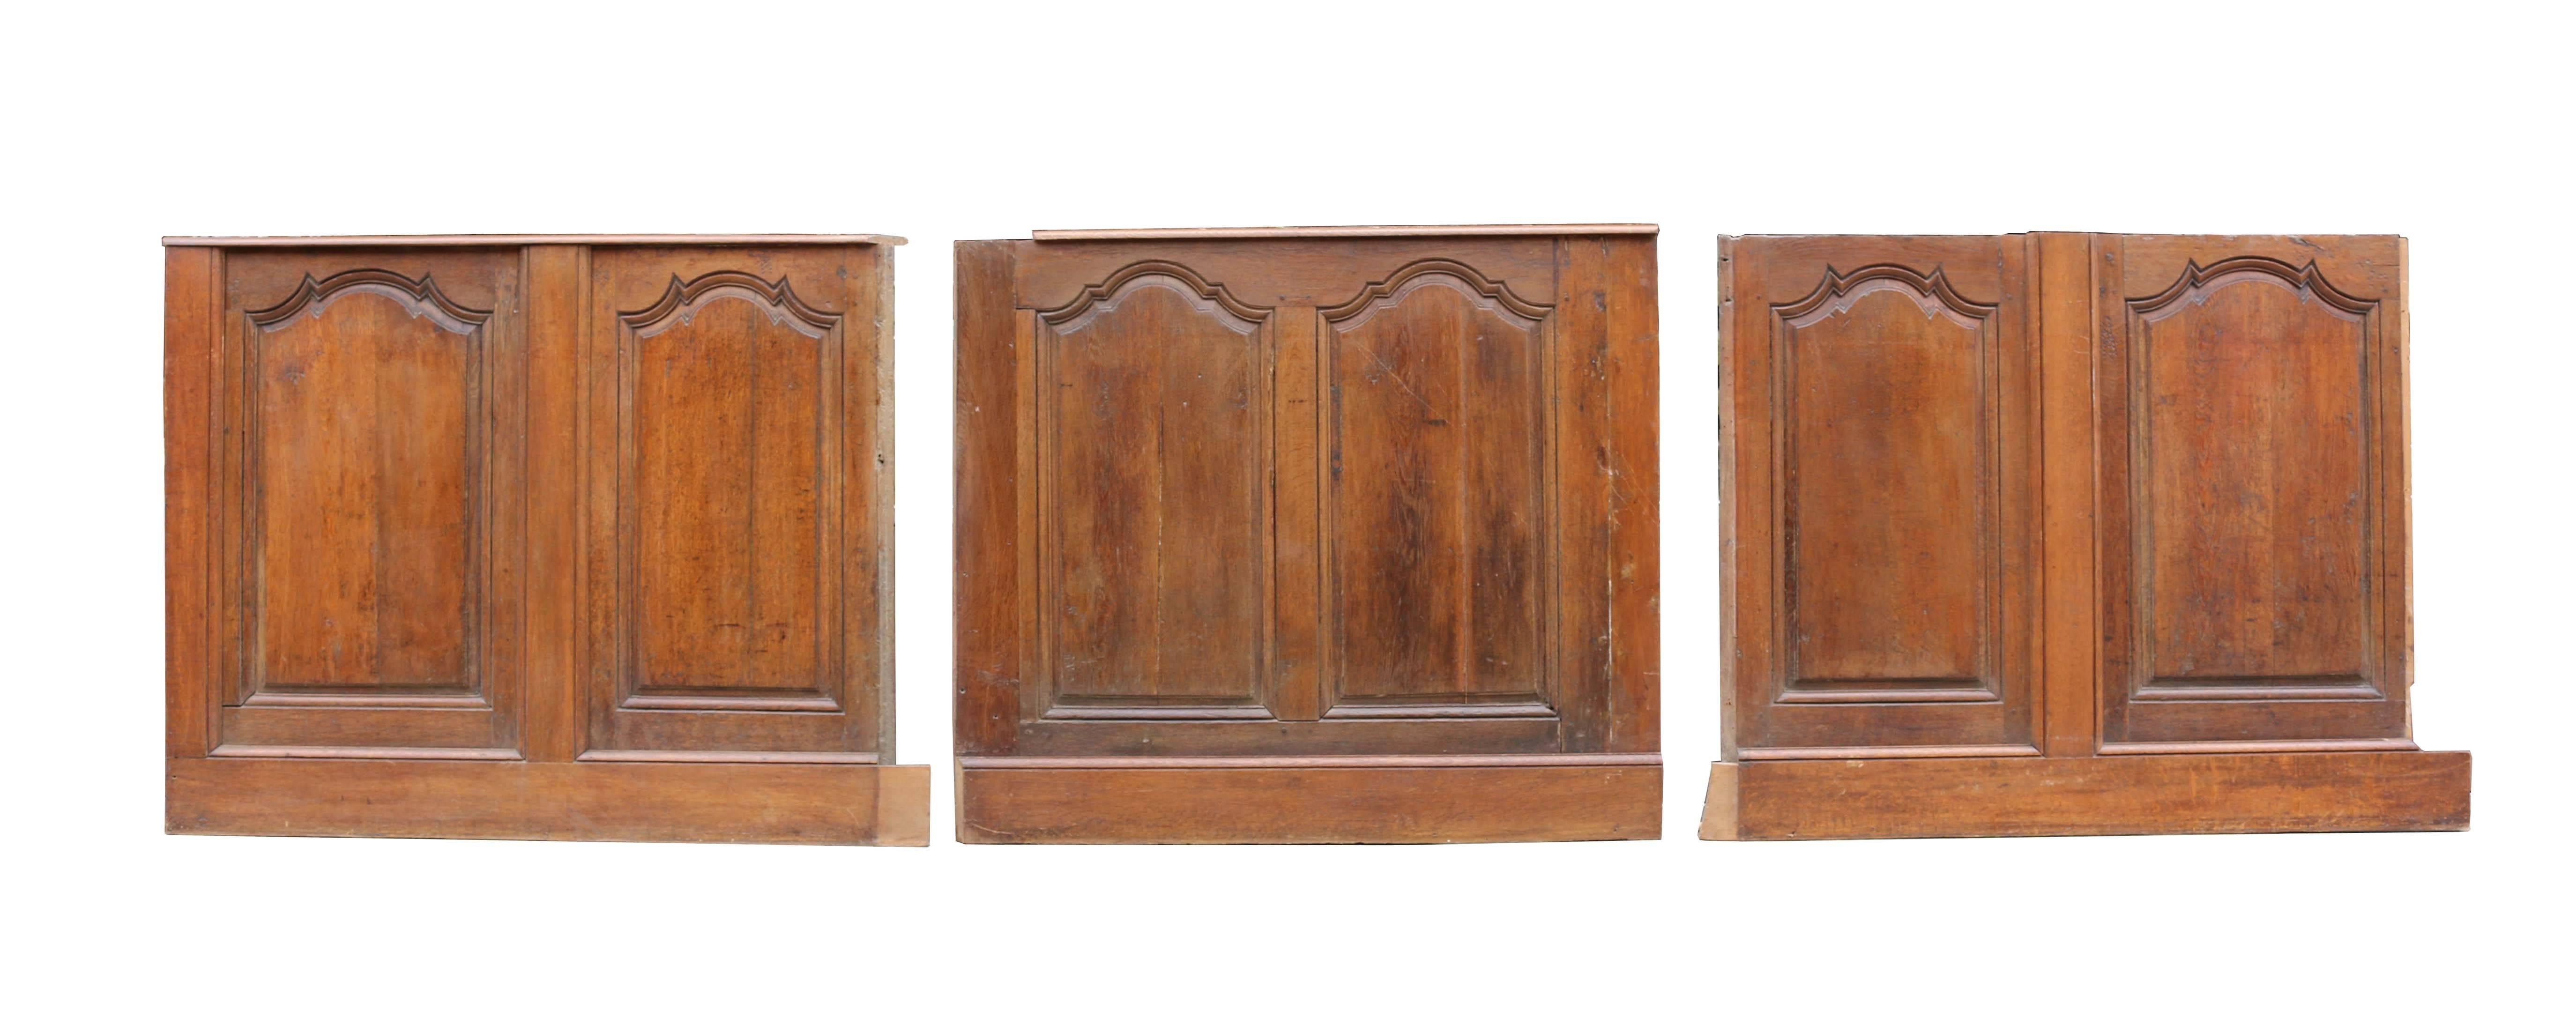 Hand-Crafted 18th Century French Oak Paneling